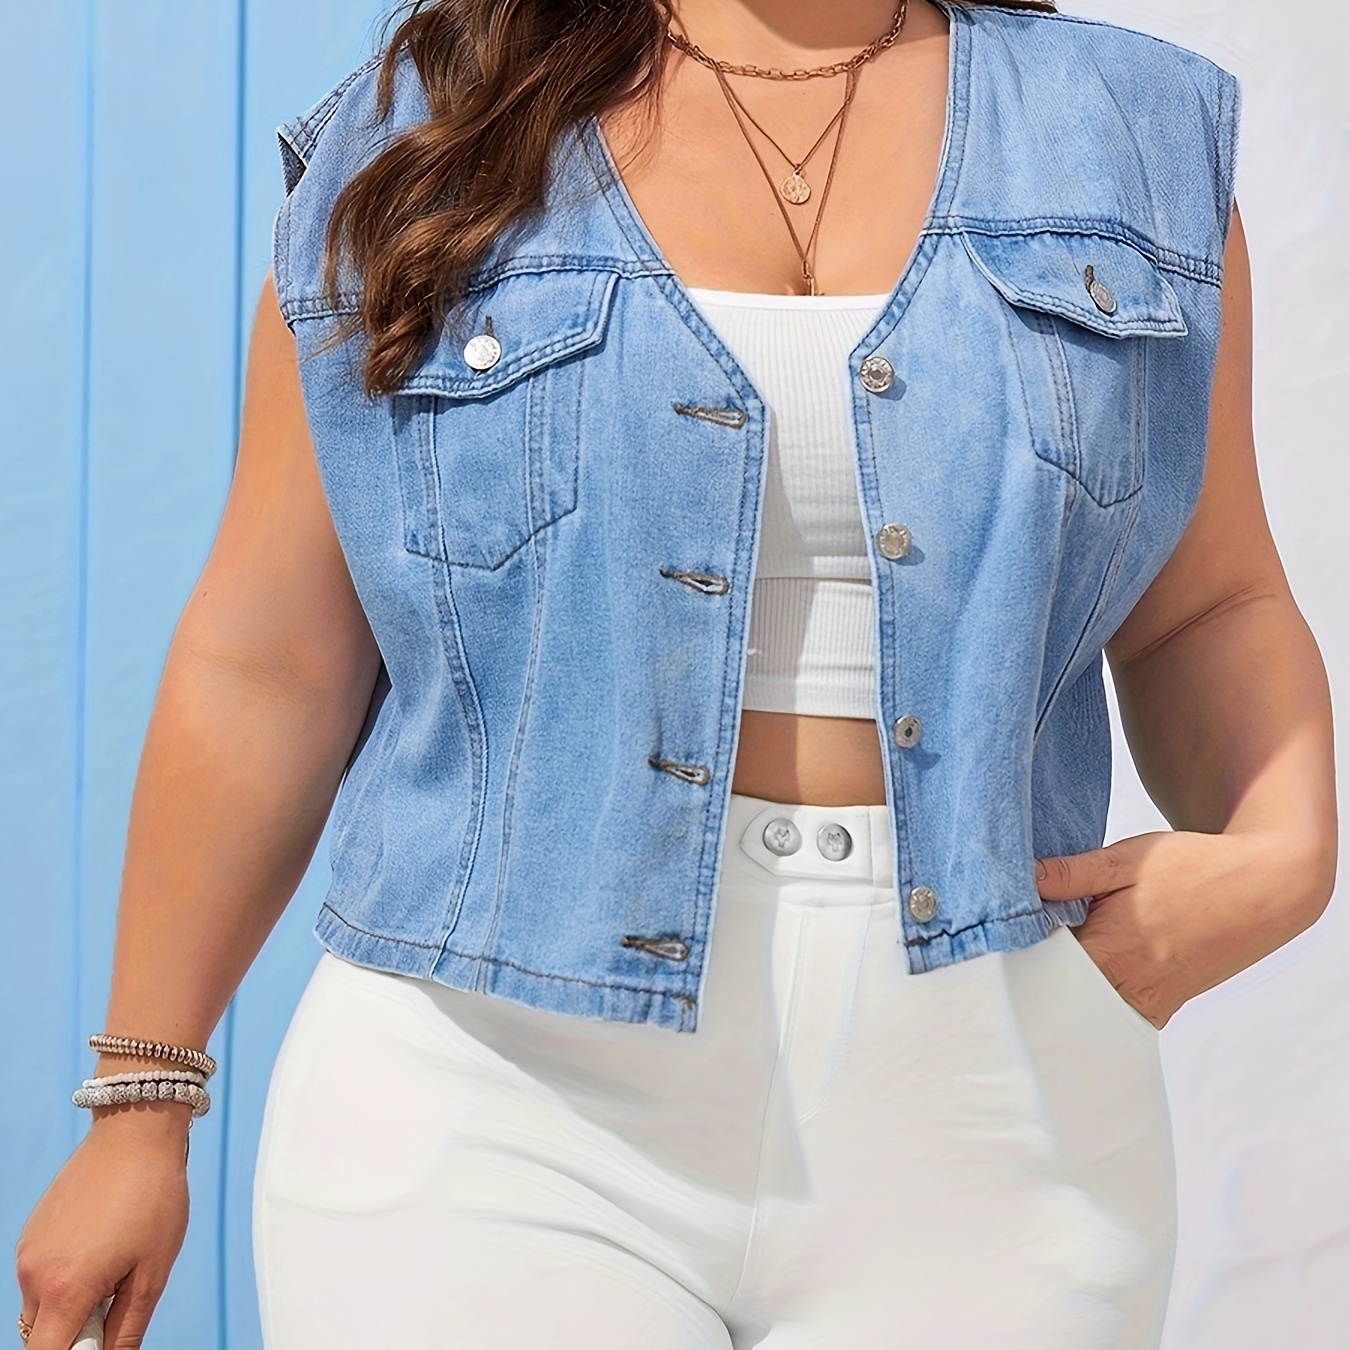 

Women's Plus Size Fashion Distressed Denim Vest, Casual Sleeveless Jacket With Pockets & V-neck, Street Style Light Blue Jean Outerwear - Perfect For Fall & Winter For Fall & Winter